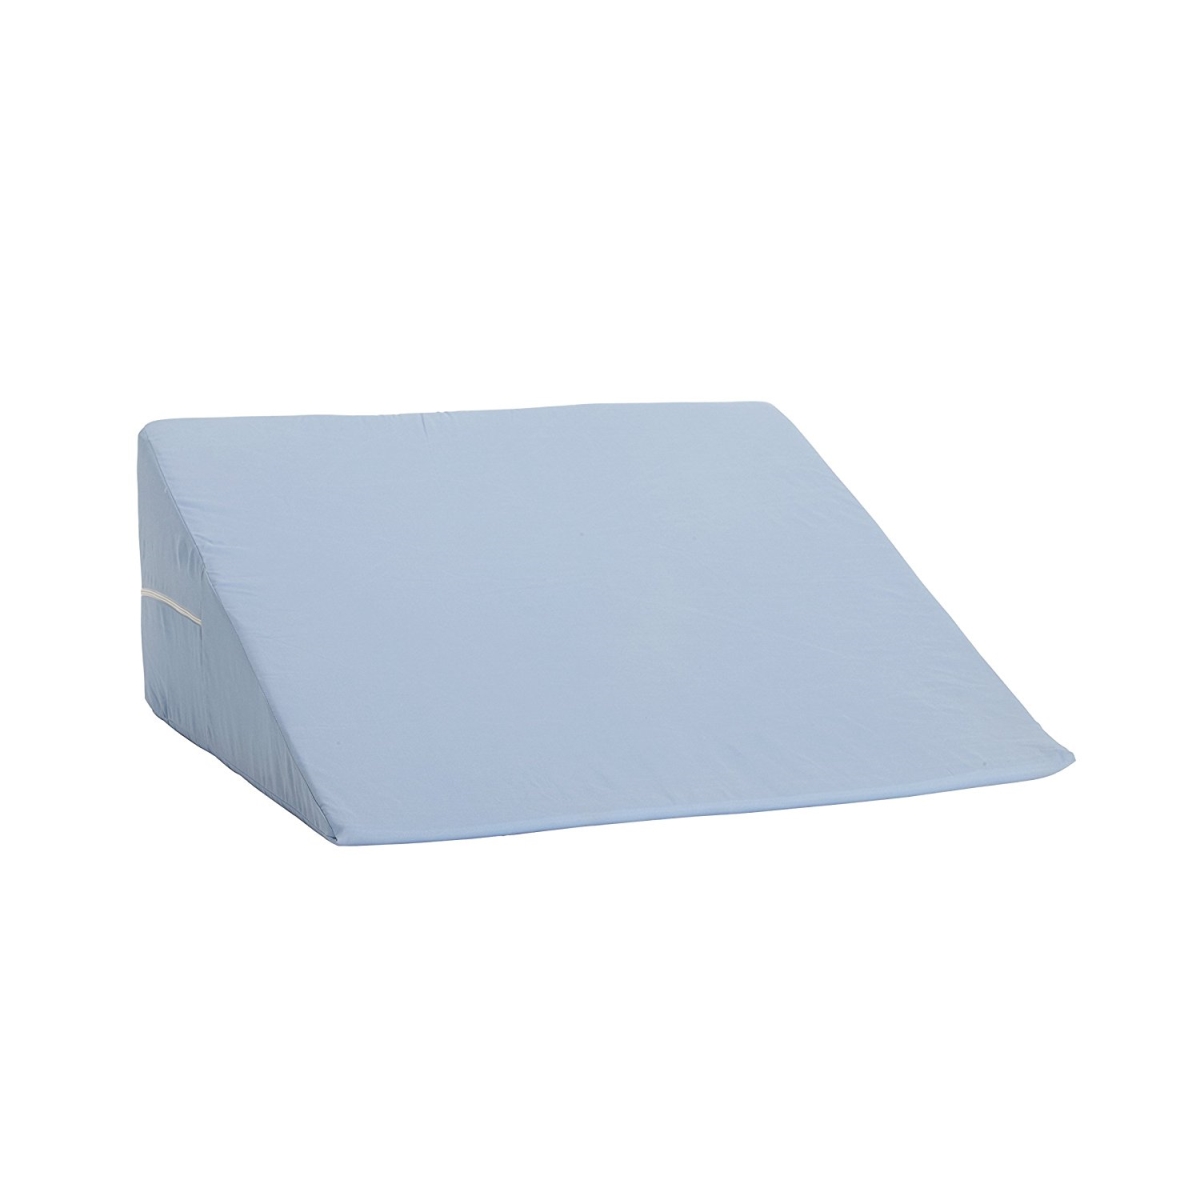 Picture of Living Health Products 10-DC-555-8027-0100 DMI - Mabis Foam Bed Wedge - Blue